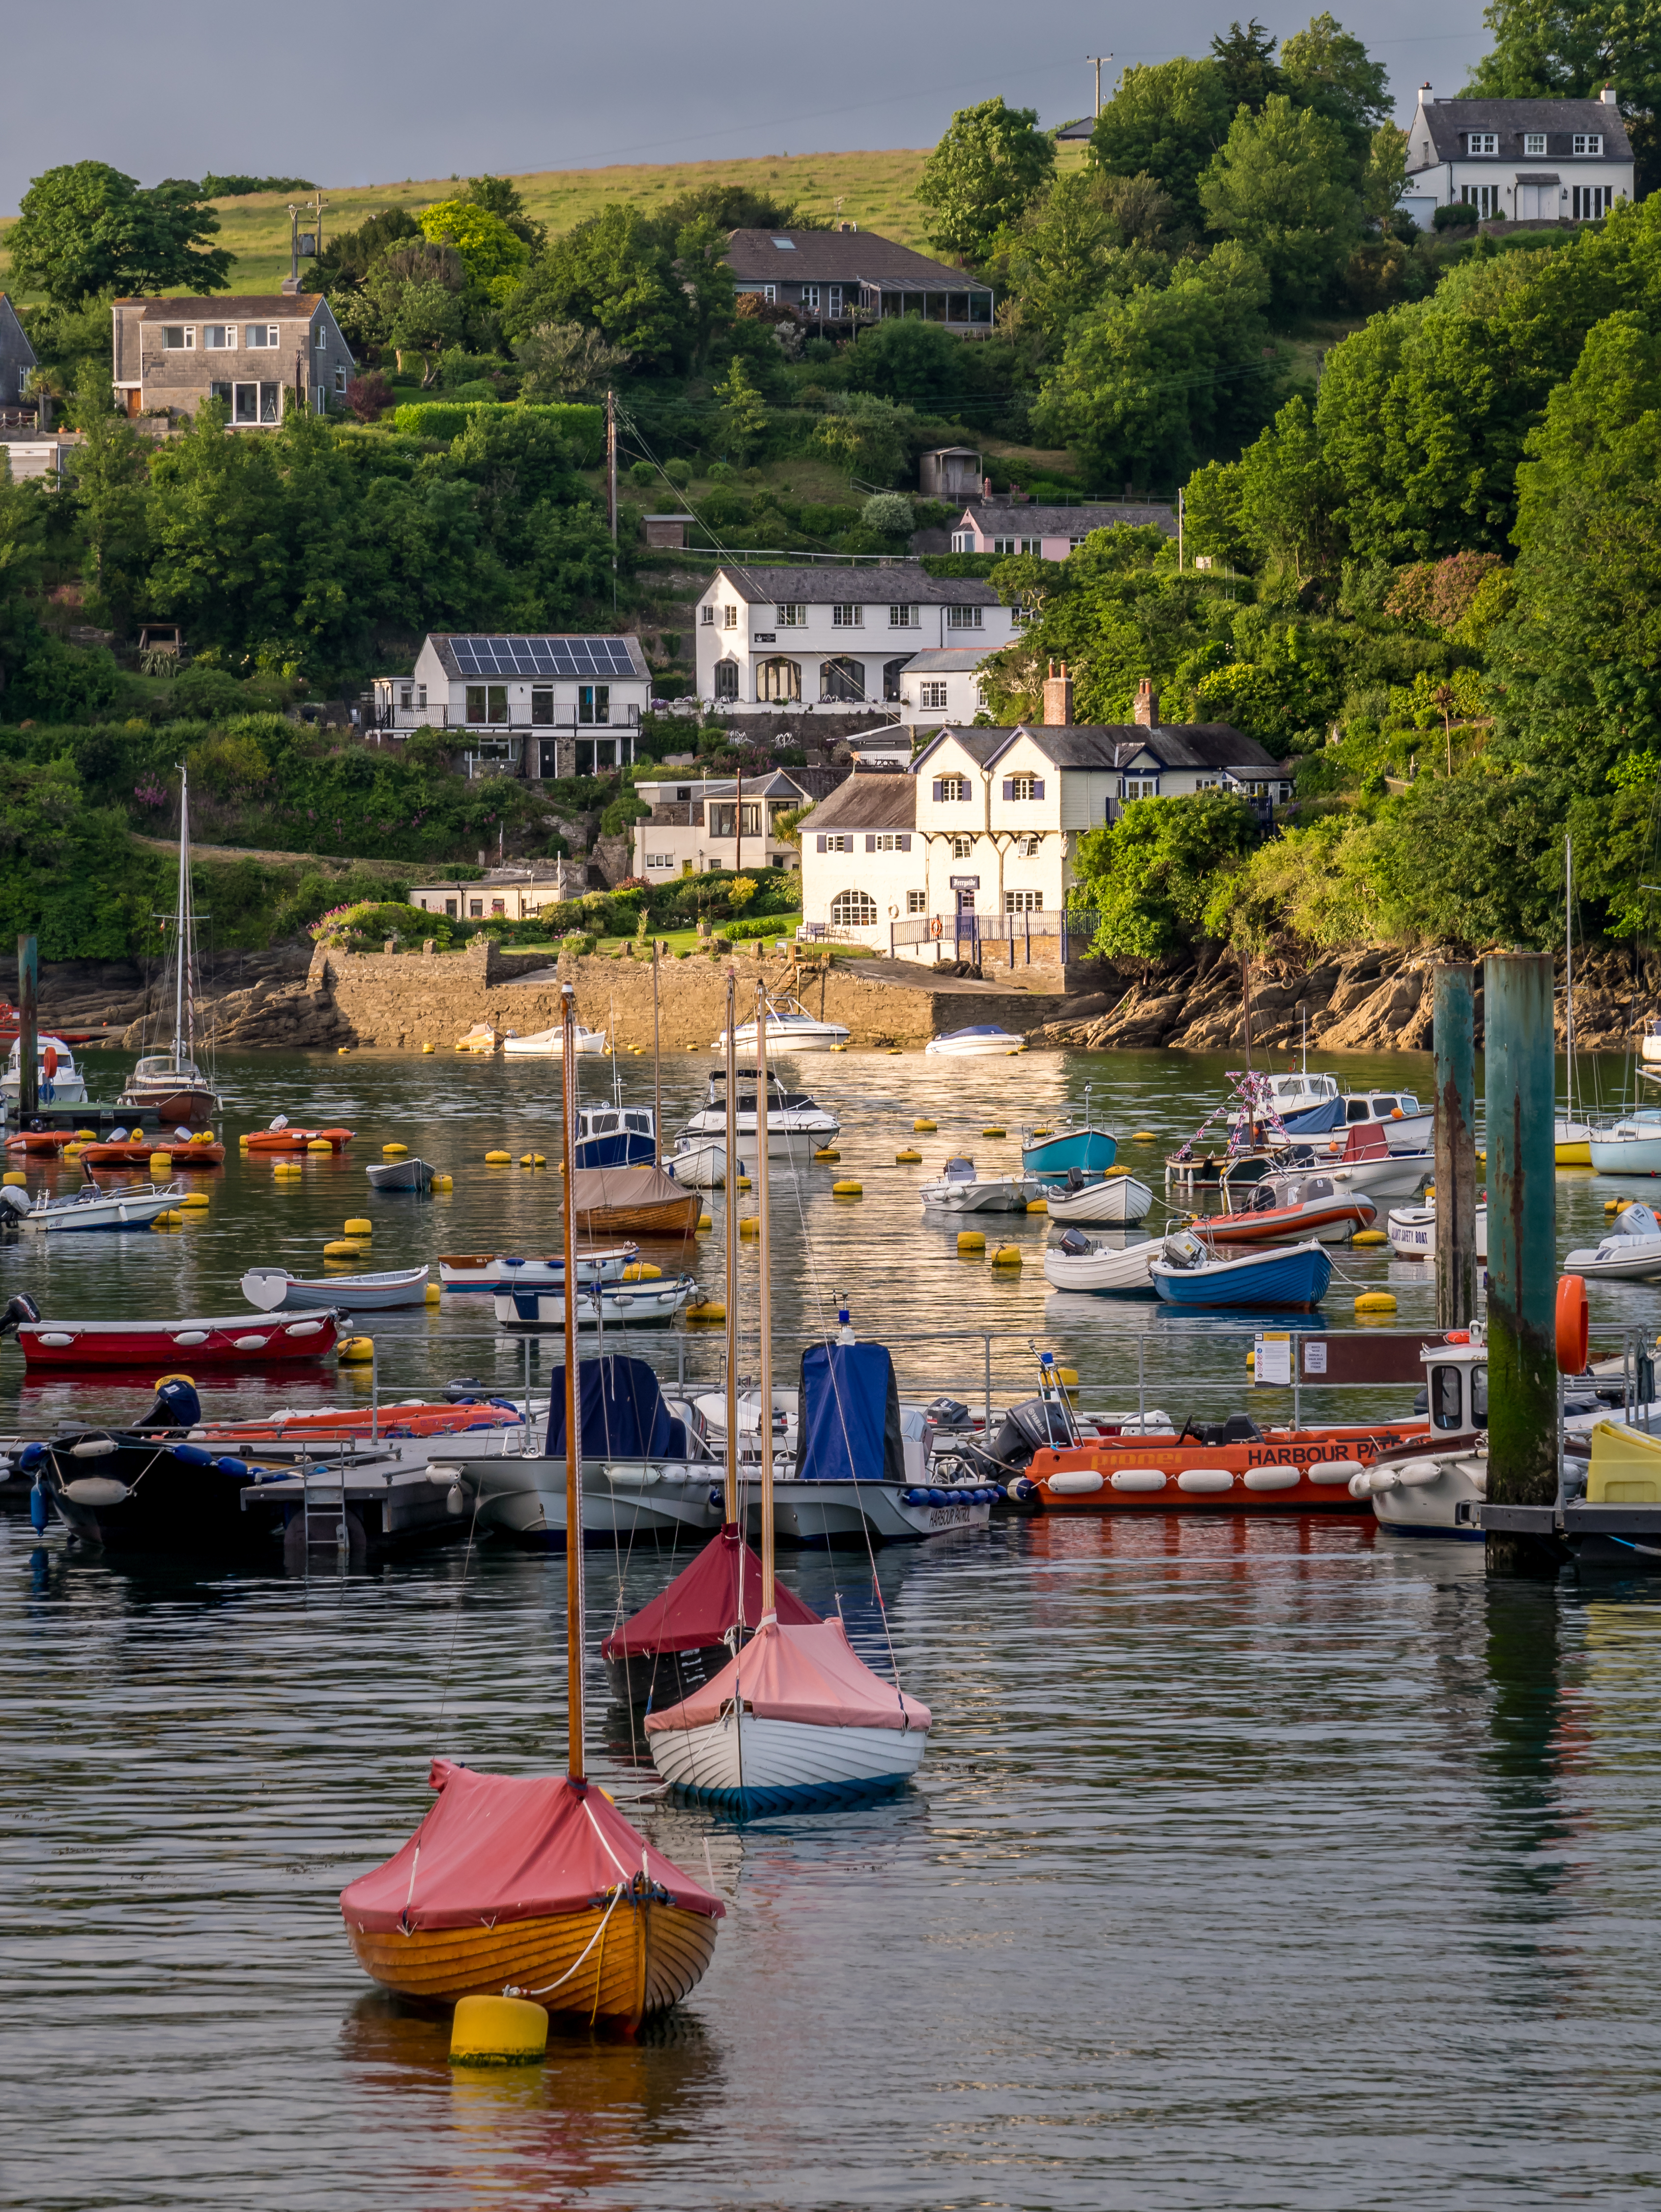 wallpapers miscellaneous, water, boats, building, miscellanea, hill